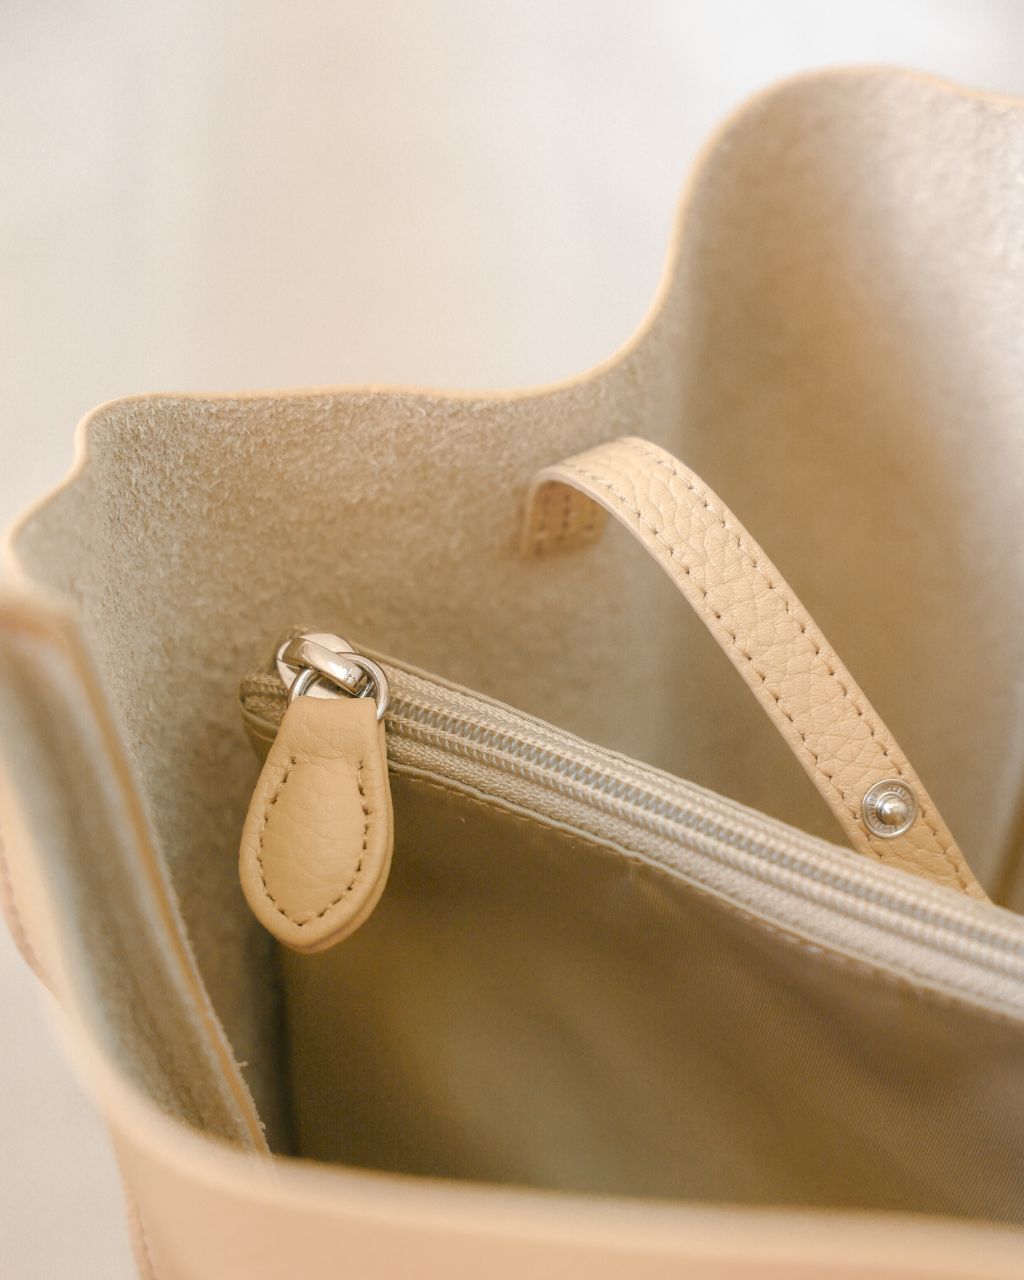 leather Zipper puller close up of Workmate tote nylon pouch in beige colour  